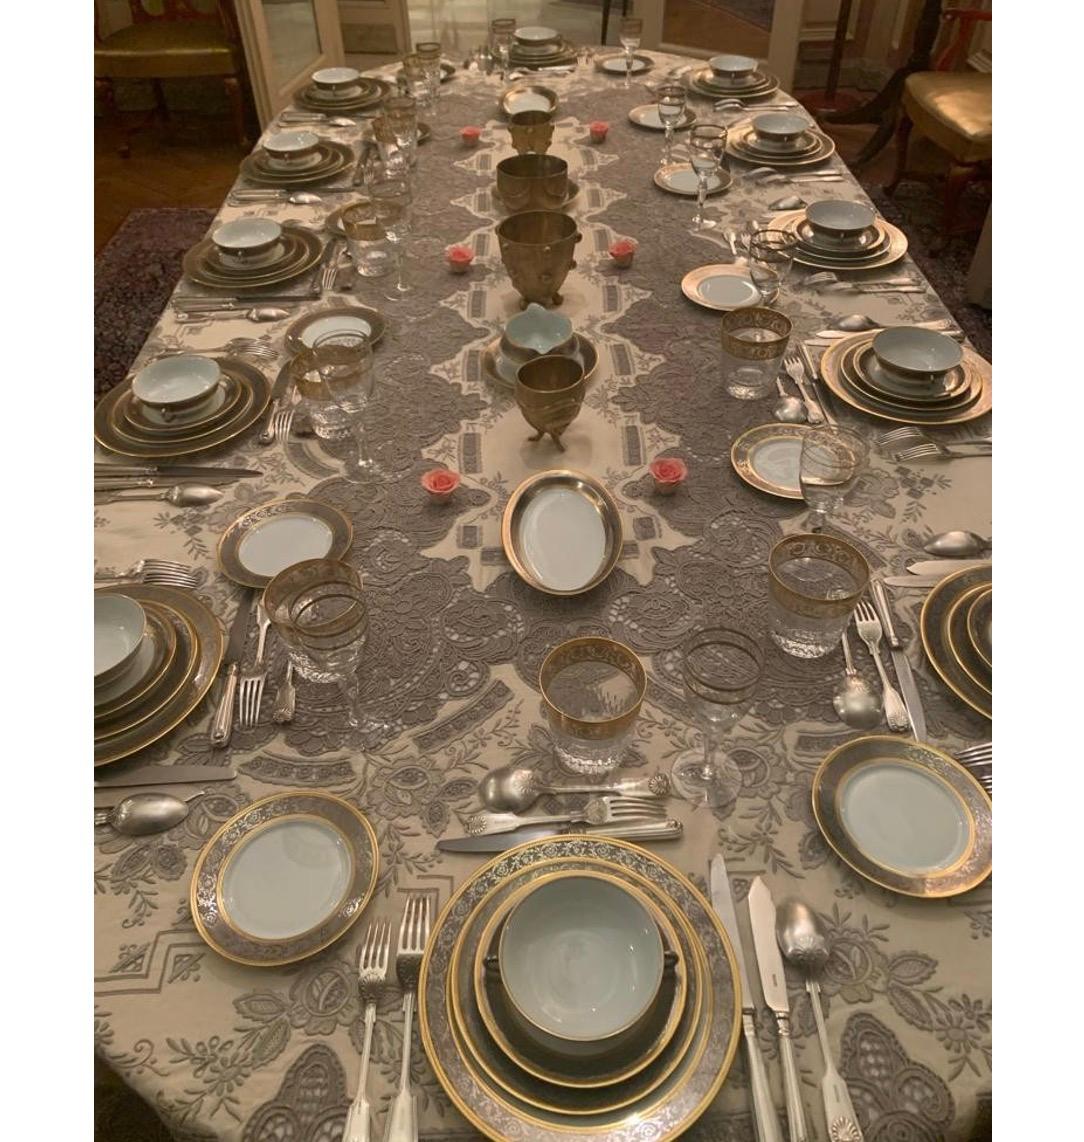 Haviland Dinner Service

The Haviland dinner service, a prestigious creation hailing from the 20th century, epitomizes the exquisite craftsmanship of Limoges porcelain. Meticulously crafted by the renowned artisans of Limoges, this opulent dinner